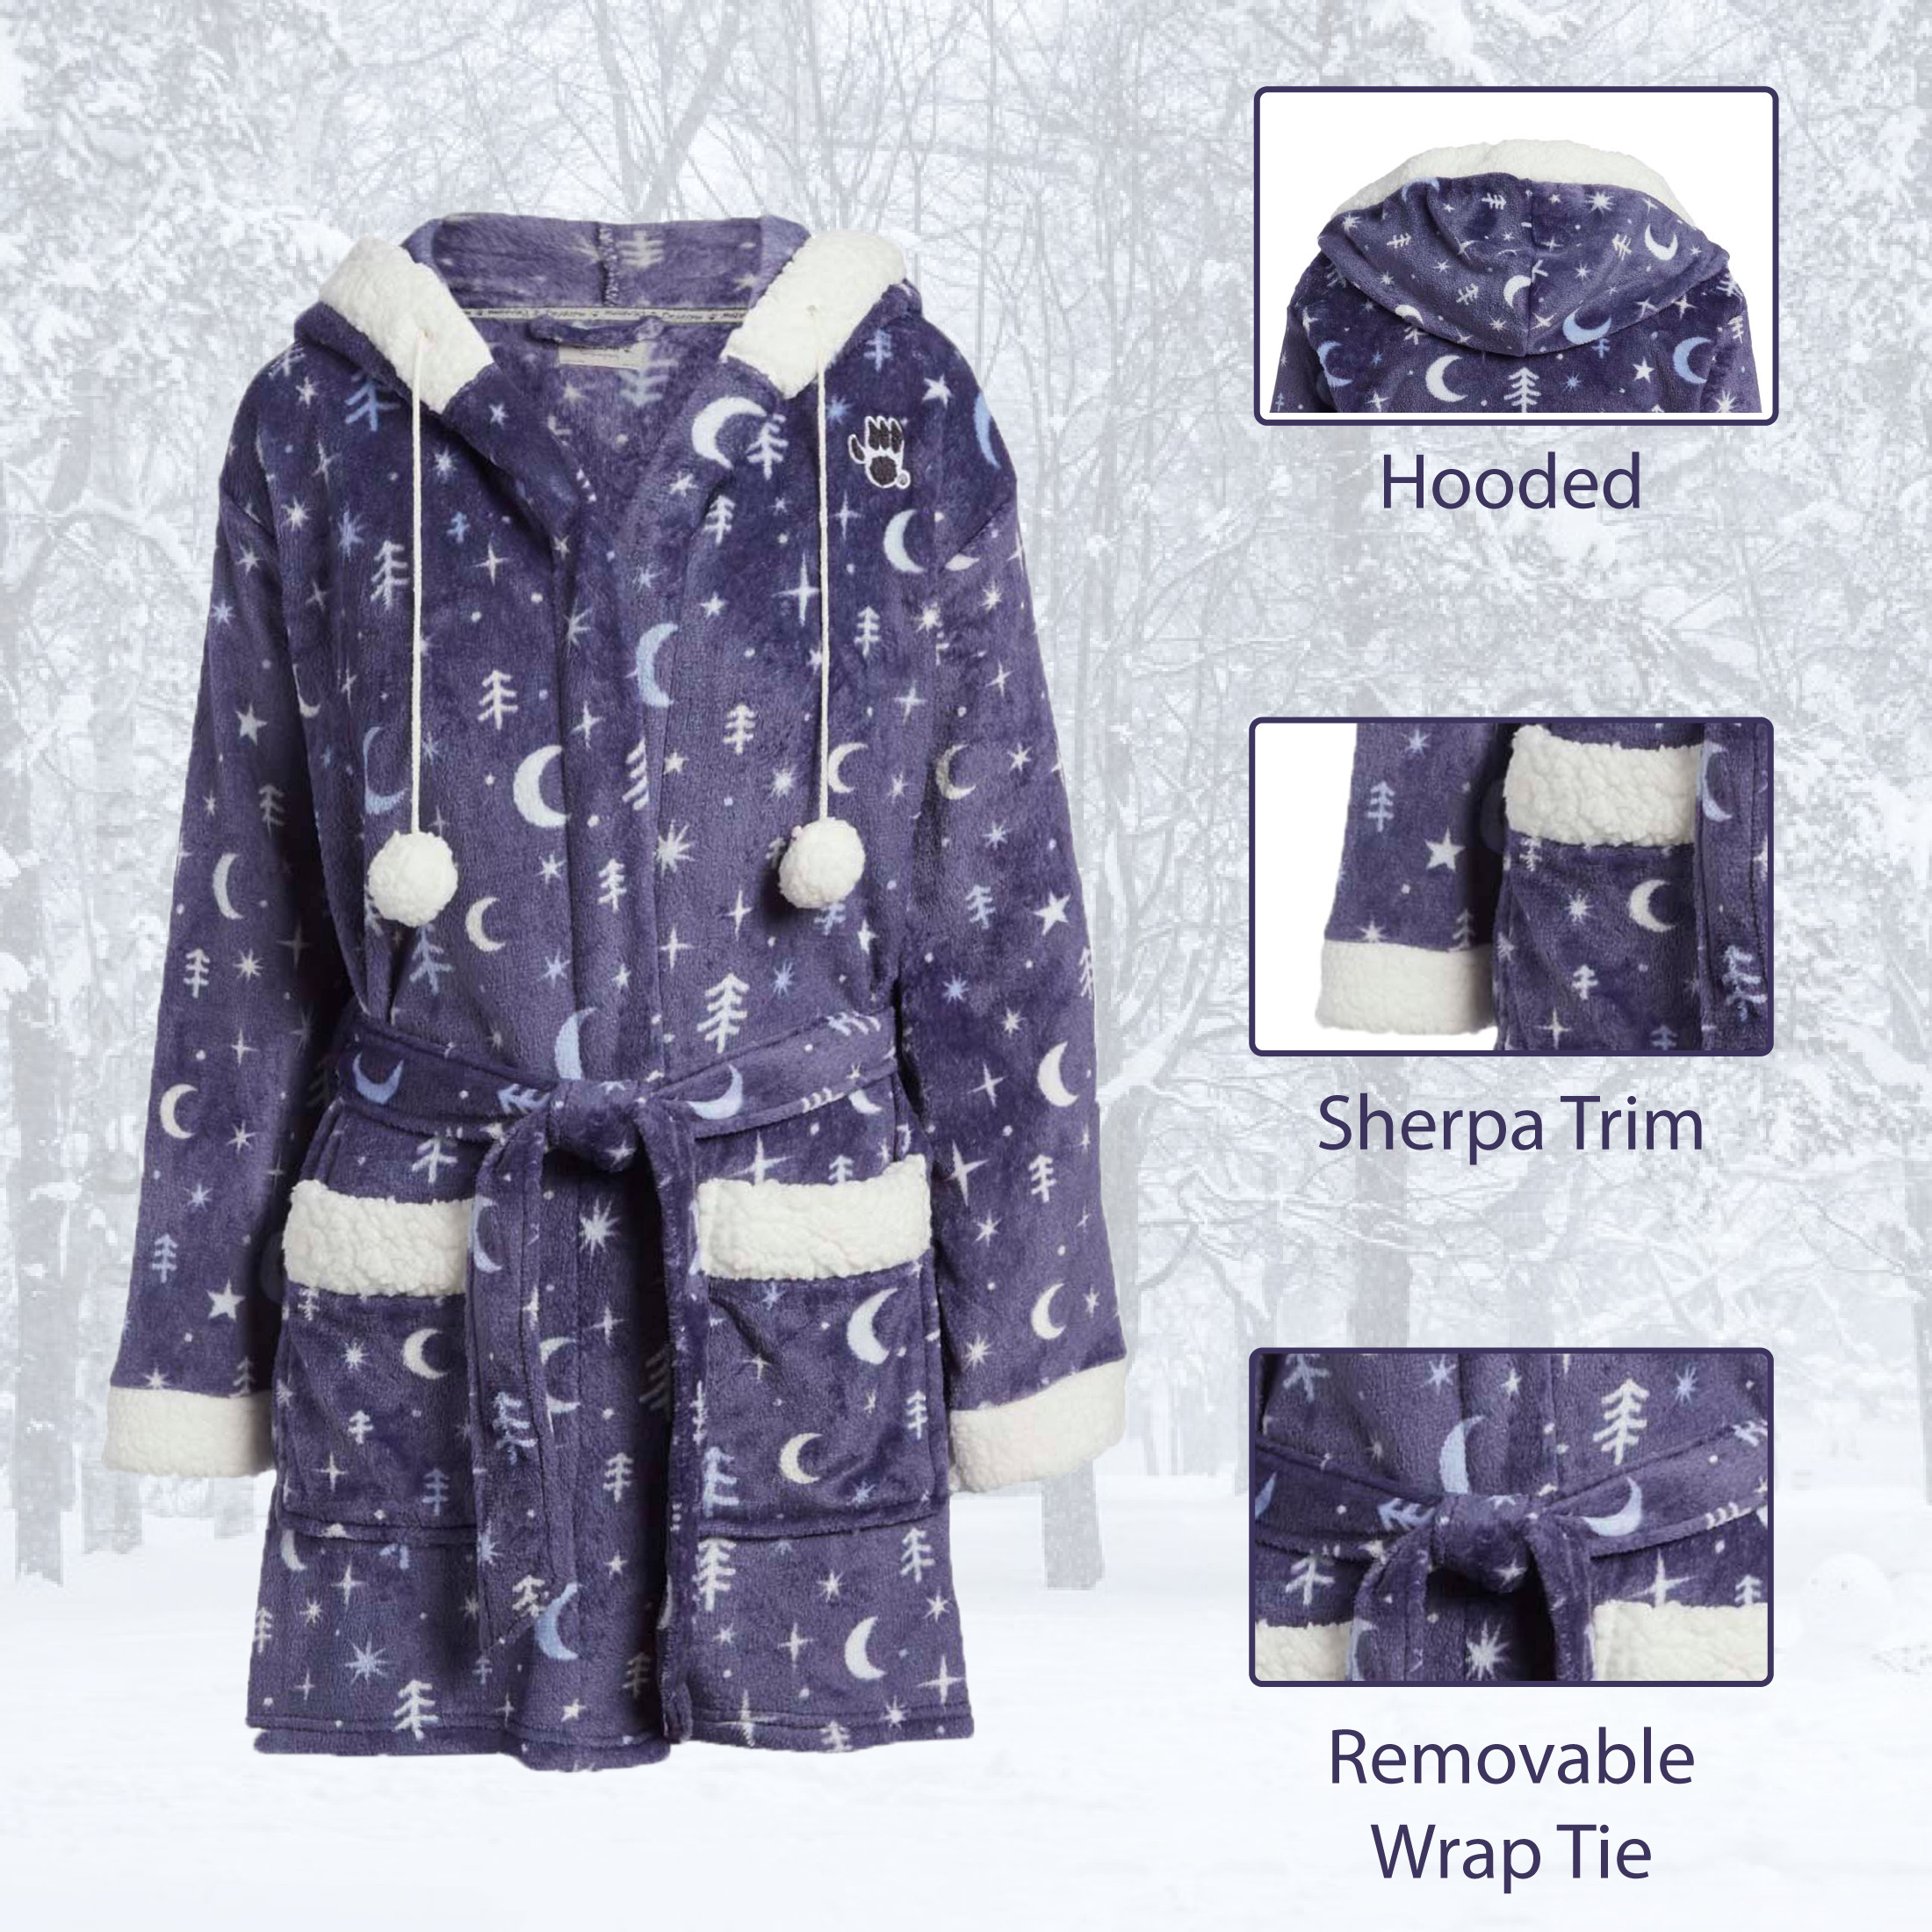 2-Pack: Women's Soft Plush Sherpa Lined Trim Print Robe With Pockets And Hood - Small